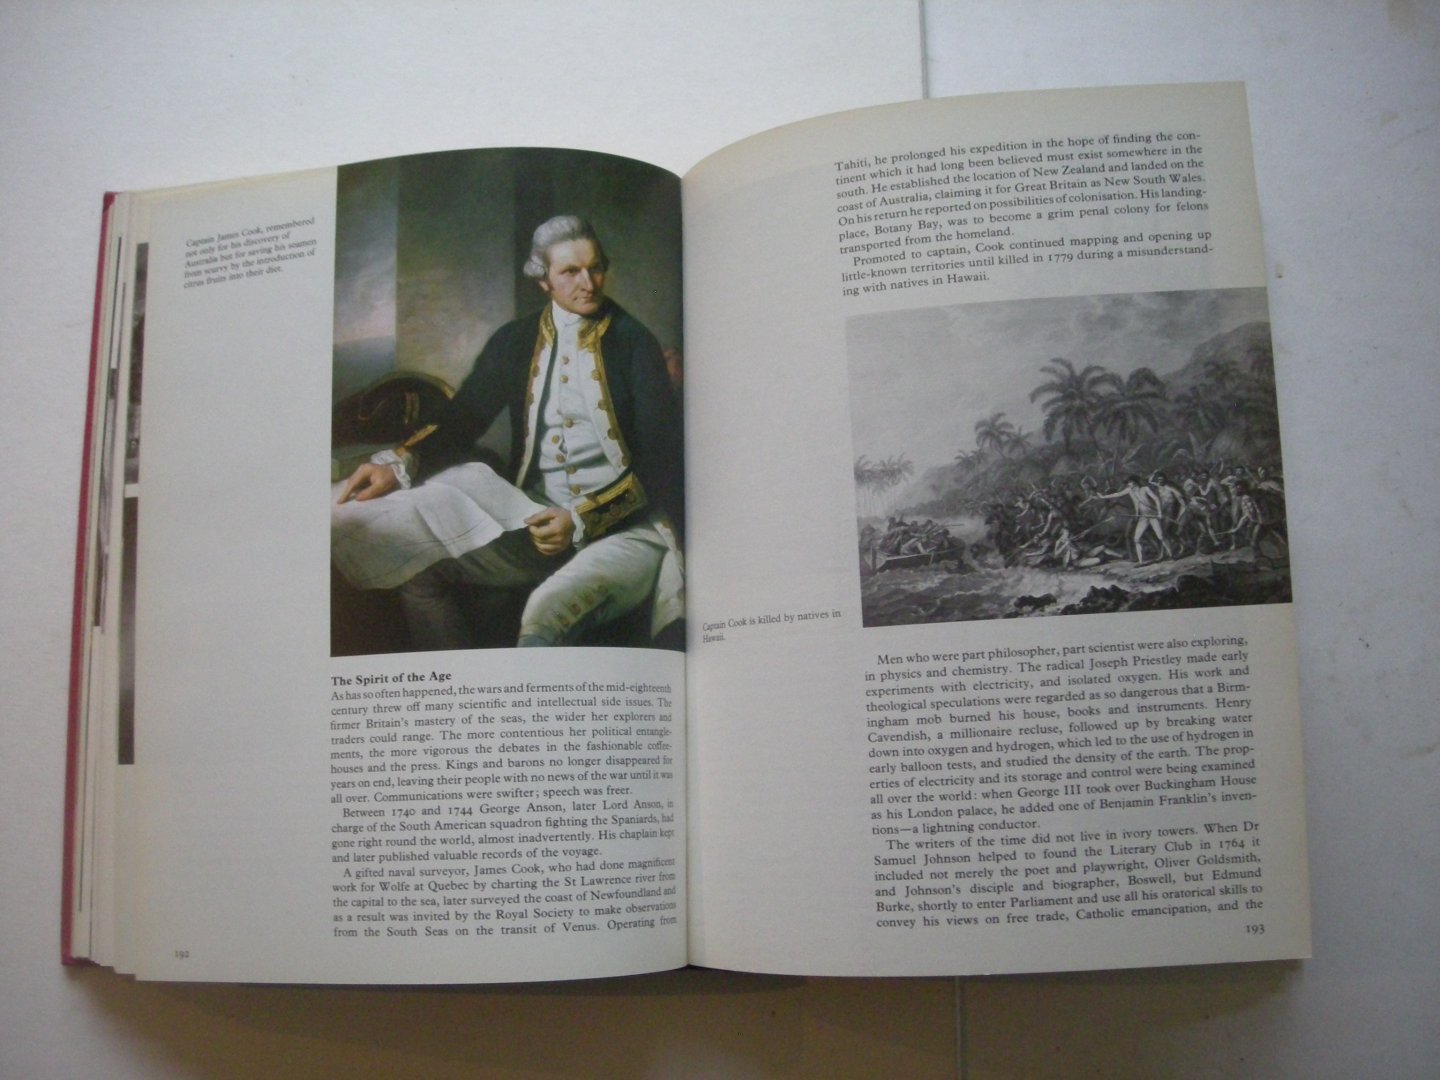 Burke, John / Bryant, A. foreword - An illustrated History of England